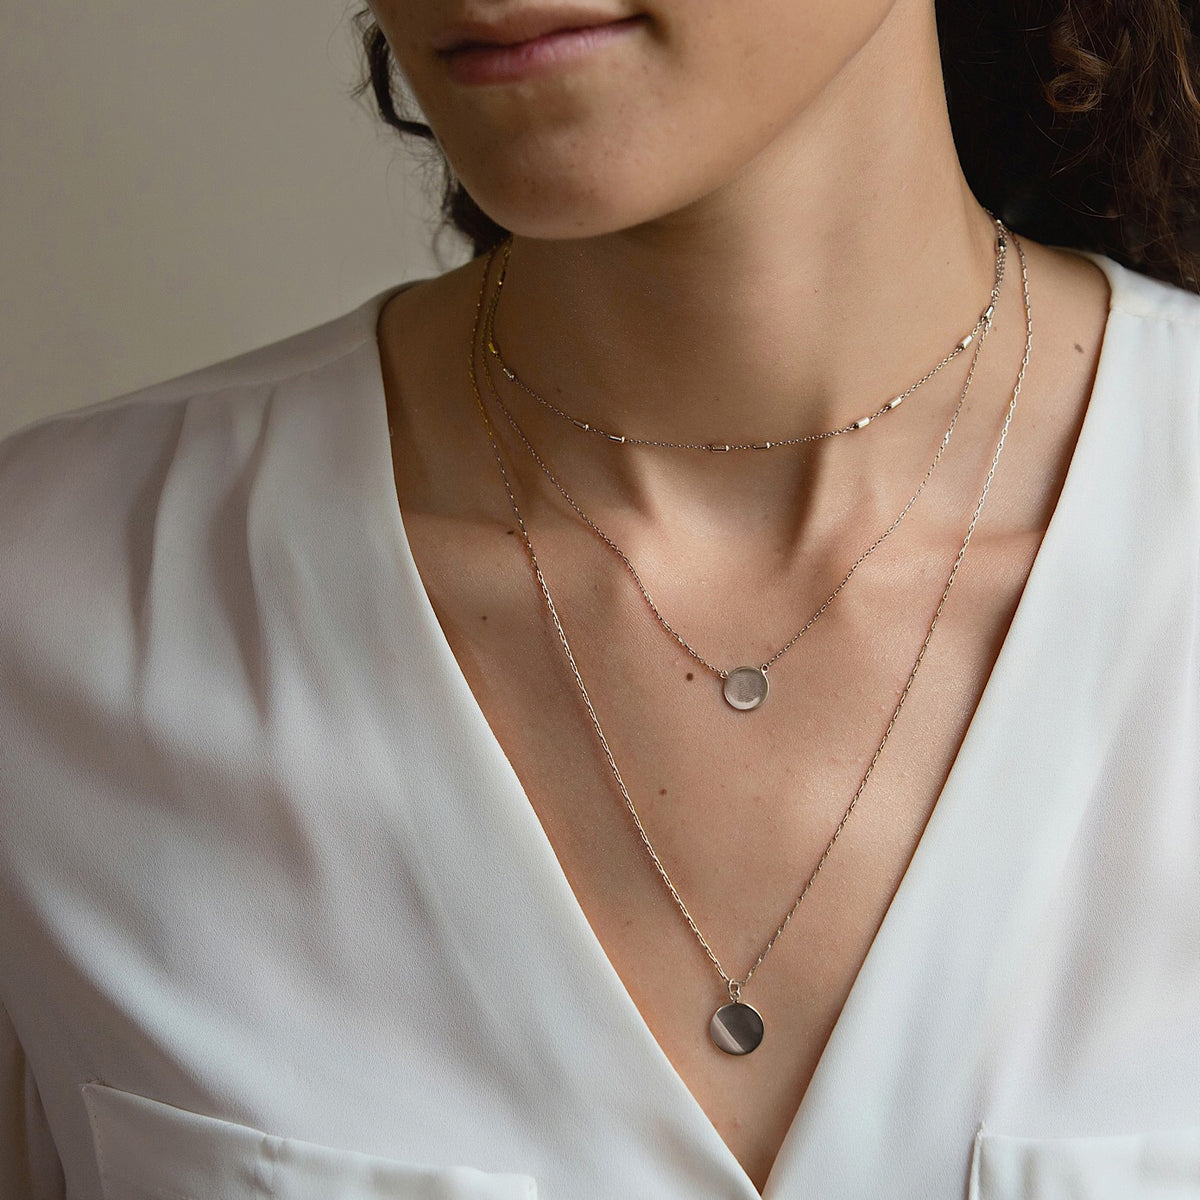 Delicate Chain Crystal Disc Layered Necklace Set in Sterling Silver – AMYO  Jewelry